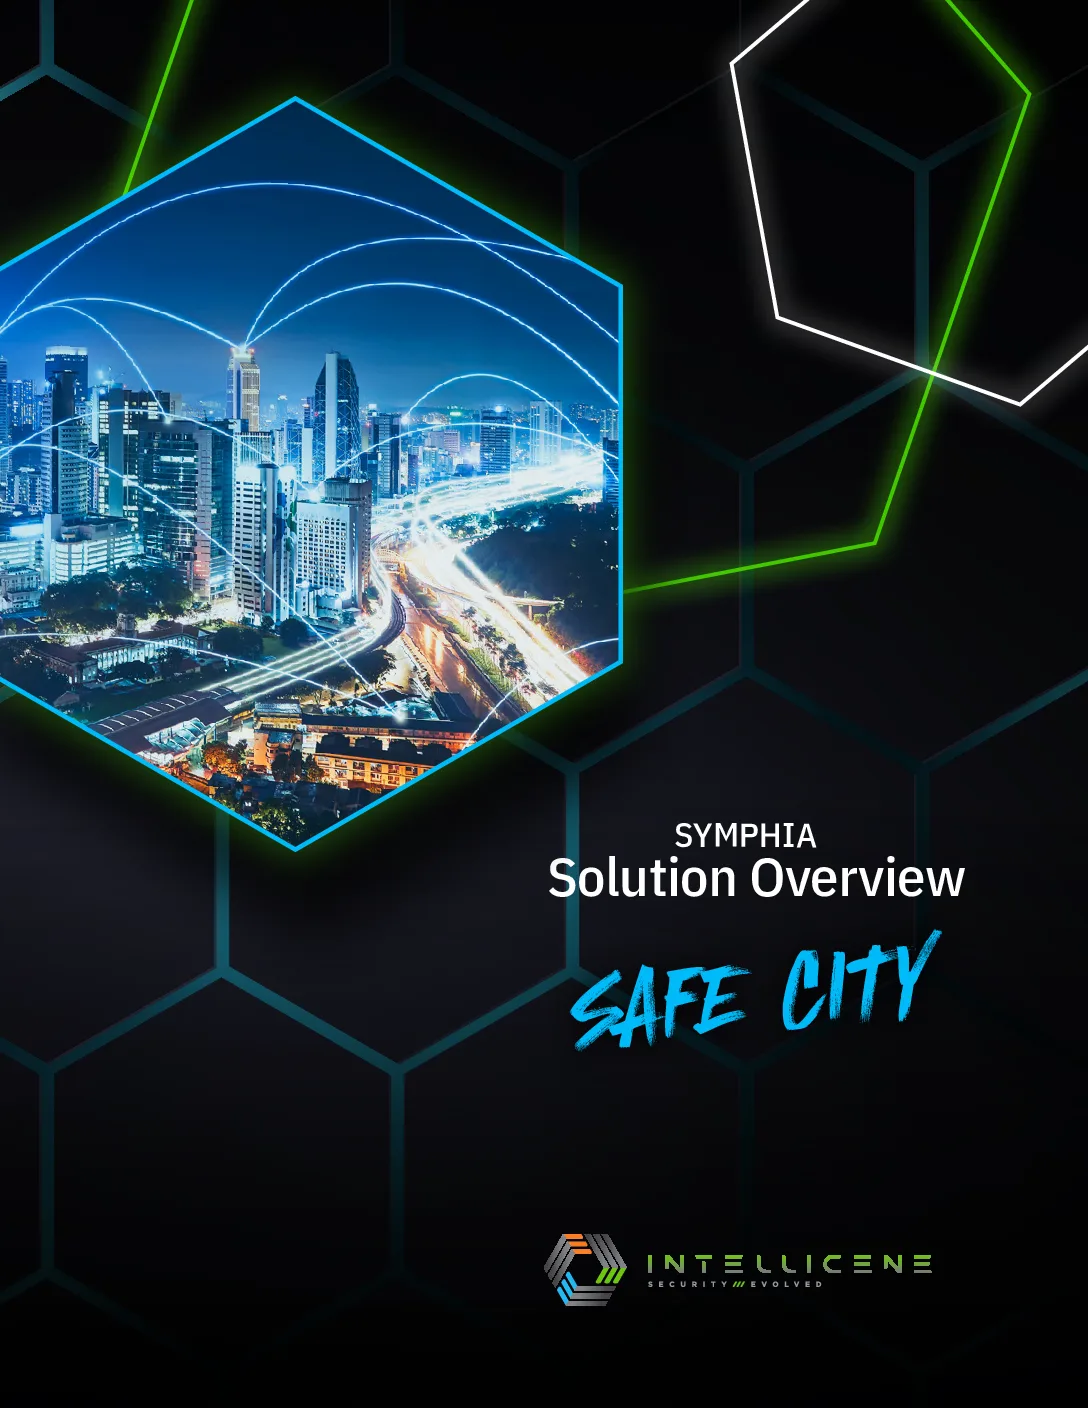 INTEL_0076_SOLUTION_OVERVIEW_SAFE_CITY_FINAL